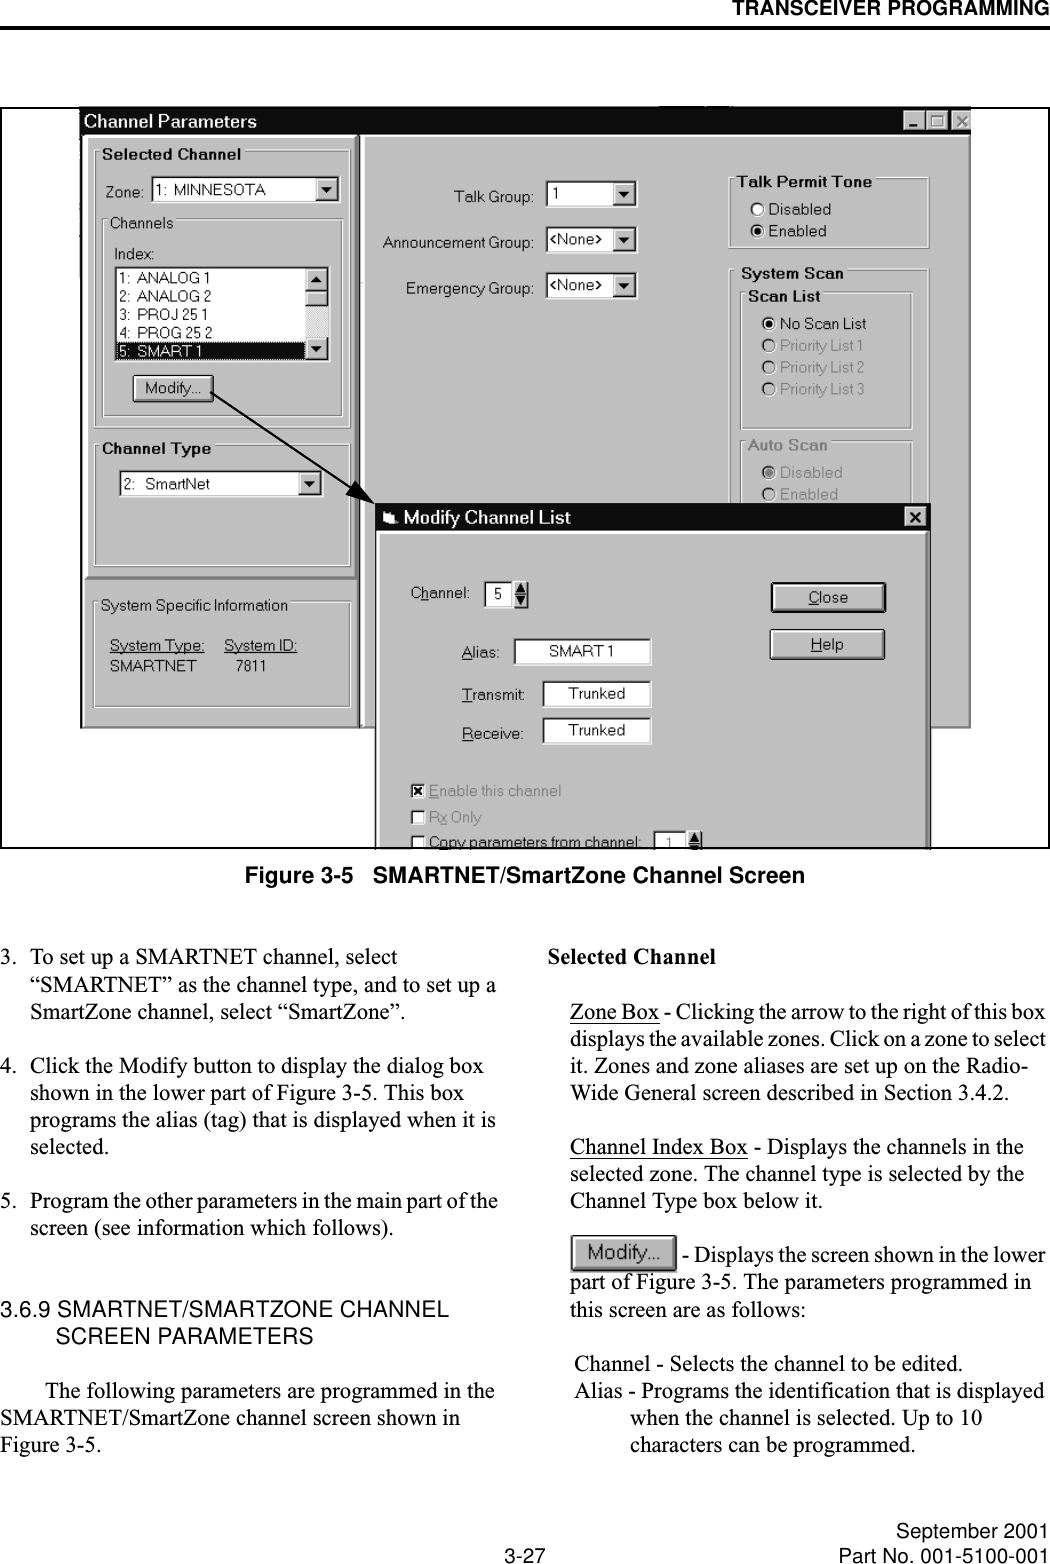 TRANSCEIVER PROGRAMMING3-27 September 2001Part No. 001-5100-001Figure 3-5   SMARTNET/SmartZone Channel Screen3. To set up a SMARTNET channel, select “SMARTNET” as the channel type, and to set up a SmartZone channel, select “SmartZone”.4. Click the Modify button to display the dialog box shown in the lower part of Figure 3-5. This box programs the alias (tag) that is displayed when it is selected.5. Program the other parameters in the main part of the screen (see information which follows). 3.6.9 SMARTNET/SMARTZONE CHANNEL SCREEN PARAMETERSThe following parameters are programmed in the SMARTNET/SmartZone channel screen shown in Figure 3-5.Selected ChannelZone Box - Clicking the arrow to the right of this box displays the available zones. Click on a zone to select it. Zones and zone aliases are set up on the Radio- Wide General screen described in Section 3.4.2.Channel Index Box - Displays the channels in the selected zone. The channel type is selected by the Channel Type box below it. - Displays the screen shown in the lower part of Figure 3-5. The parameters programmed in this screen are as follows:Channel - Selects the channel to be edited.Alias - Programs the identification that is displayed when the channel is selected. Up to 10 characters can be programmed. 